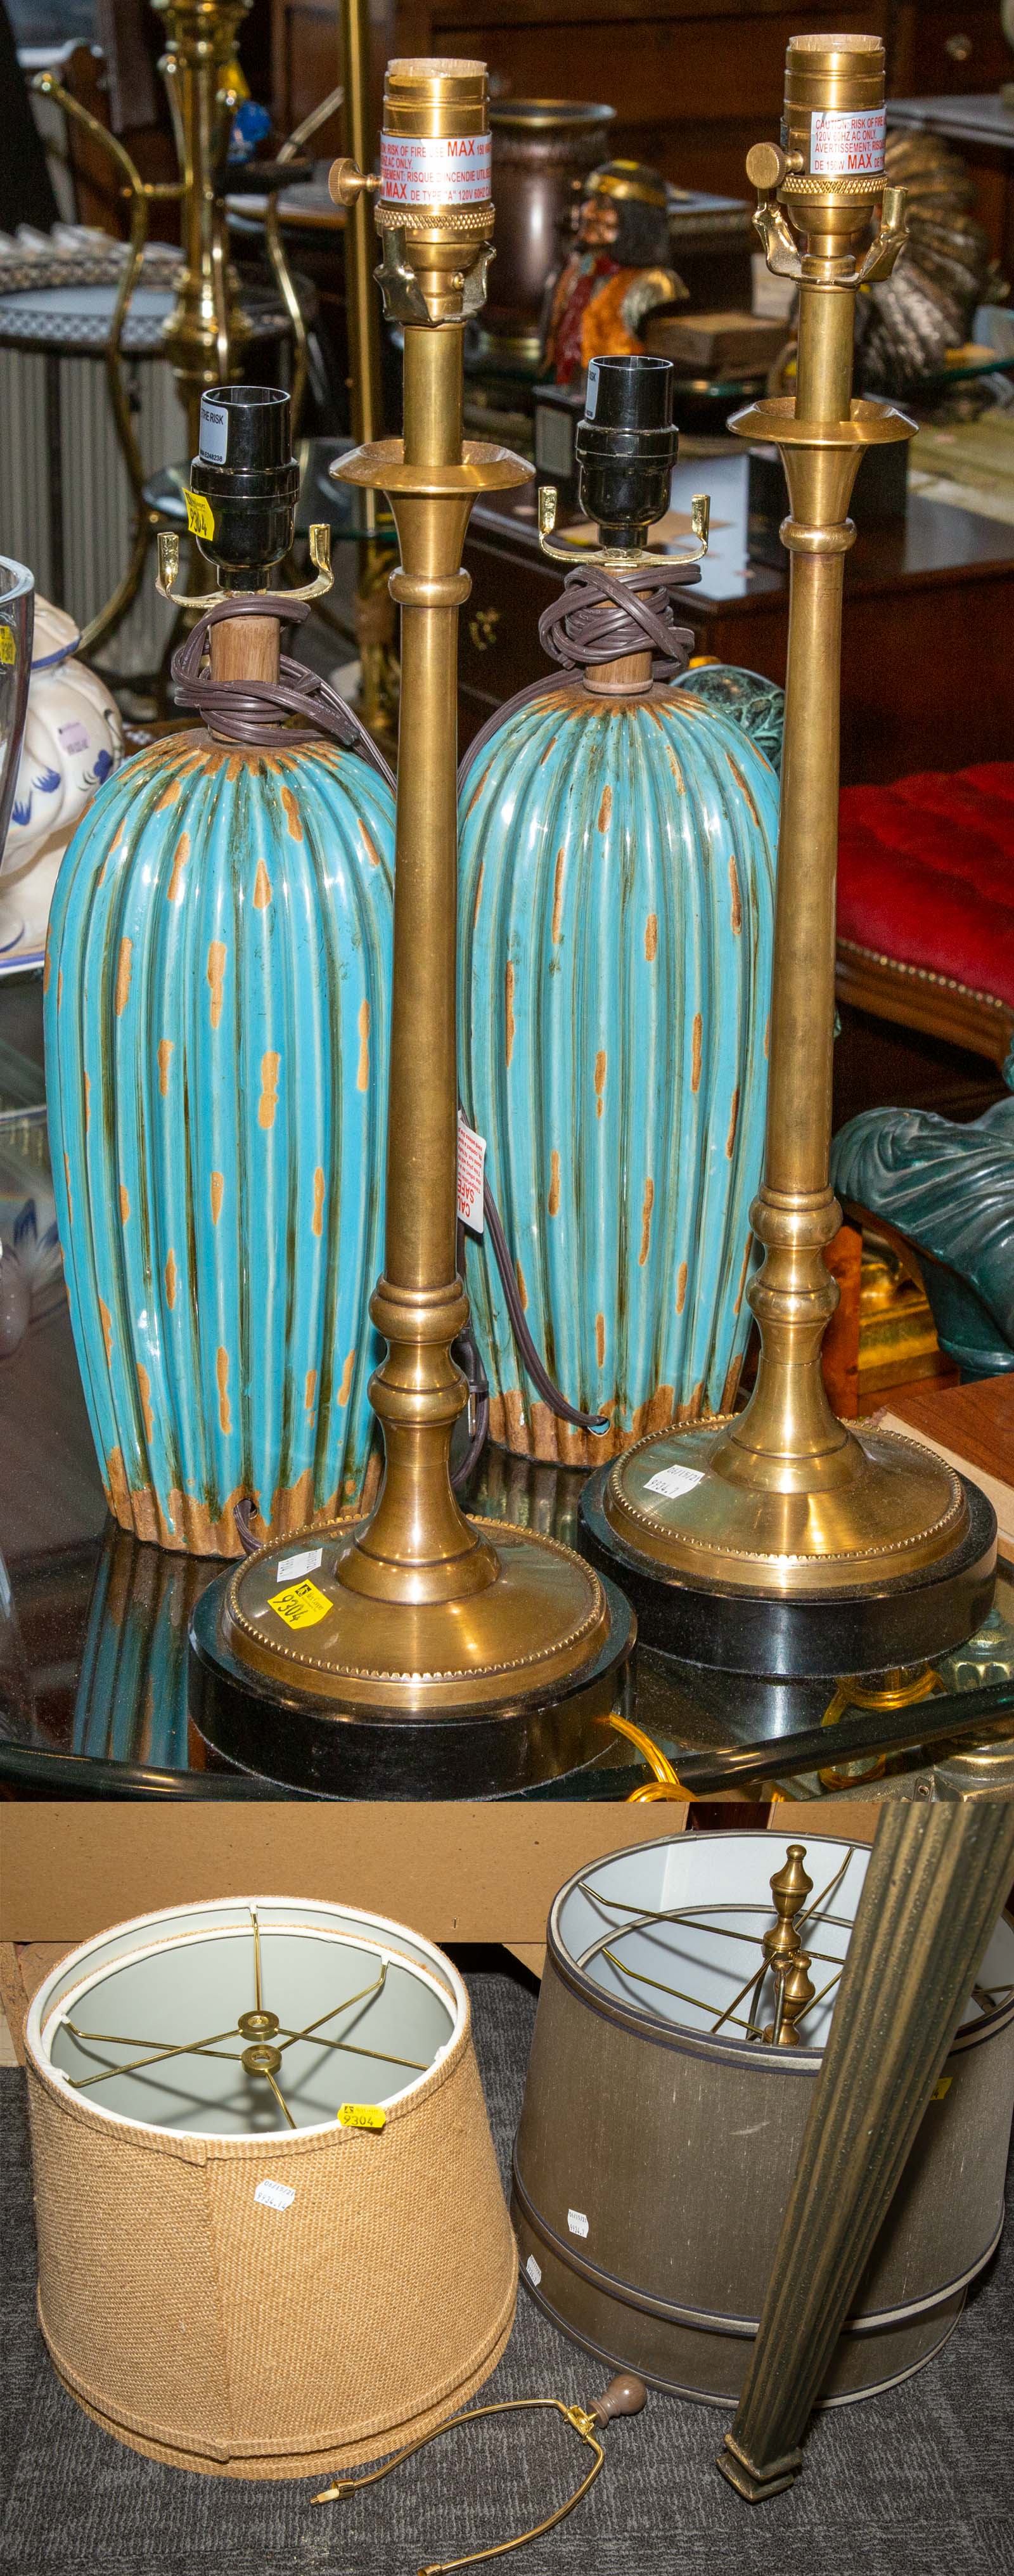 TWO PAIRS OF TABLE LAMPS With shades.